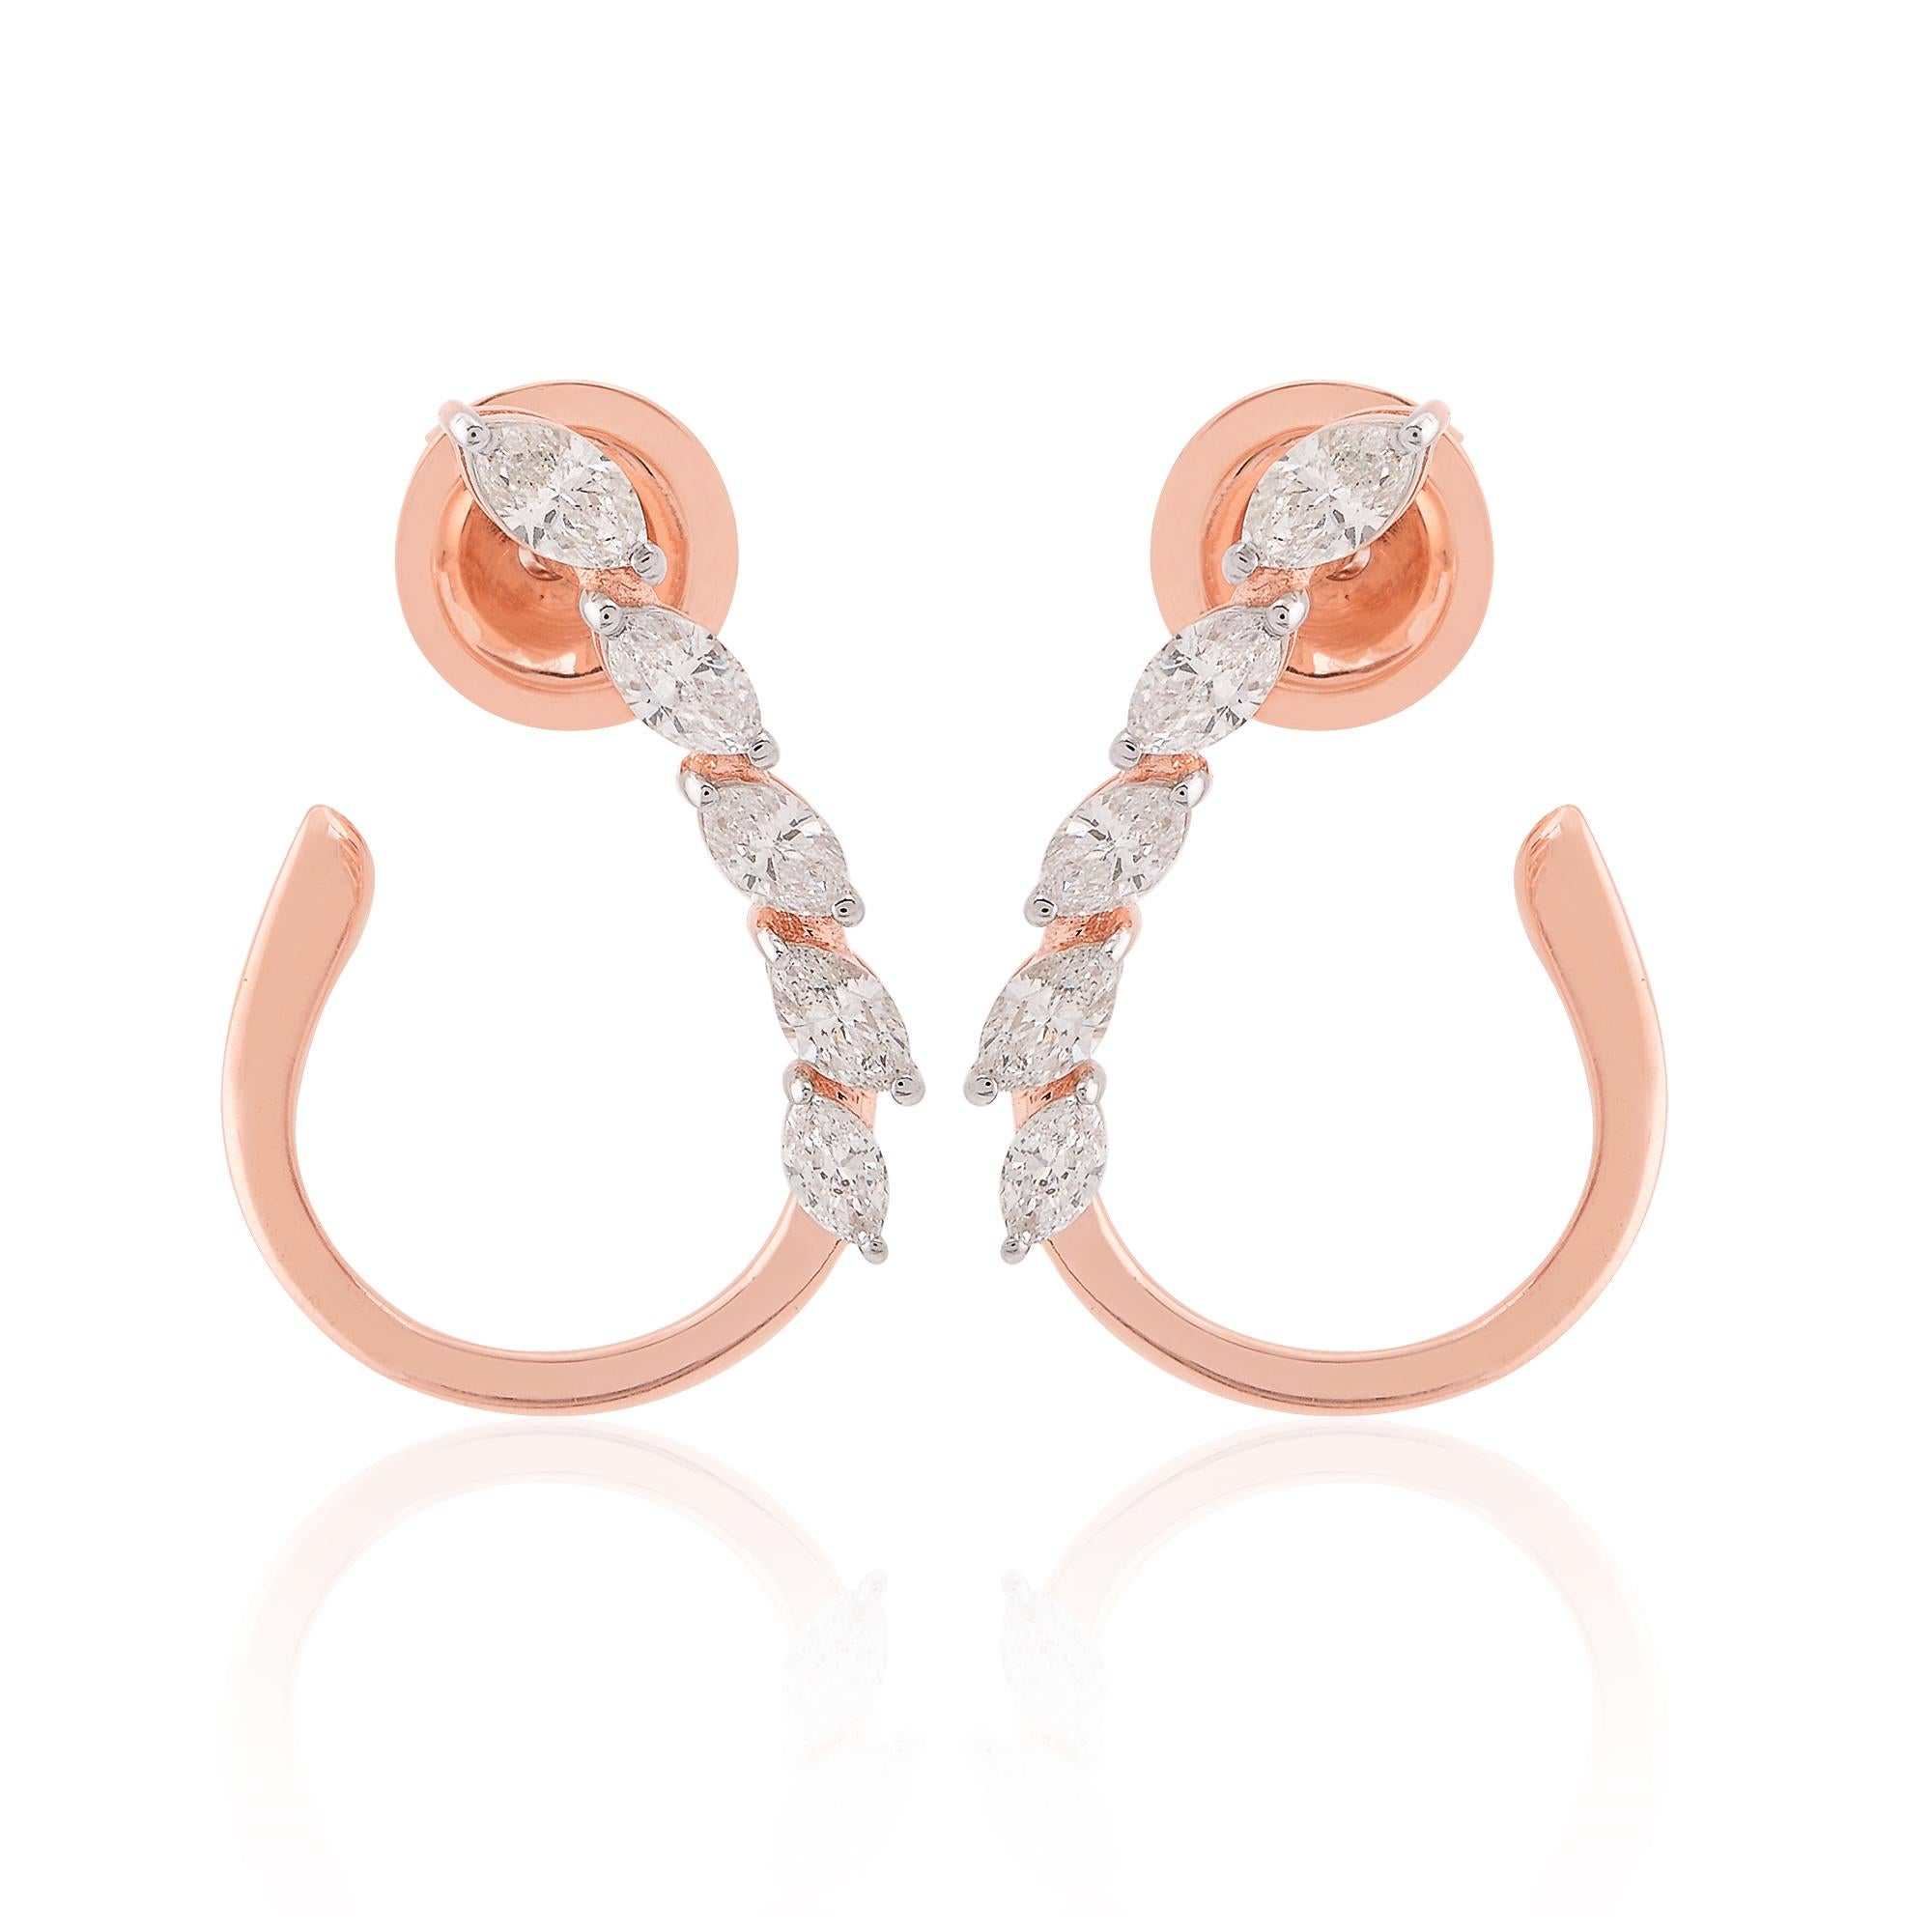 Item Code :- SEE-11751A
Gross Wet. :- 3.97 gm
18k Rose Gold Wet. :- 3.82 gm
Diamond Wet. :- 0.77 Ct. ( AVERAGE DIAMOND CLARITY SI1-SI2 & COLOR H-I )
Earrings Size :- 20 mm approx.
✦ Sizing
.....................
We can adjust most items to fit your